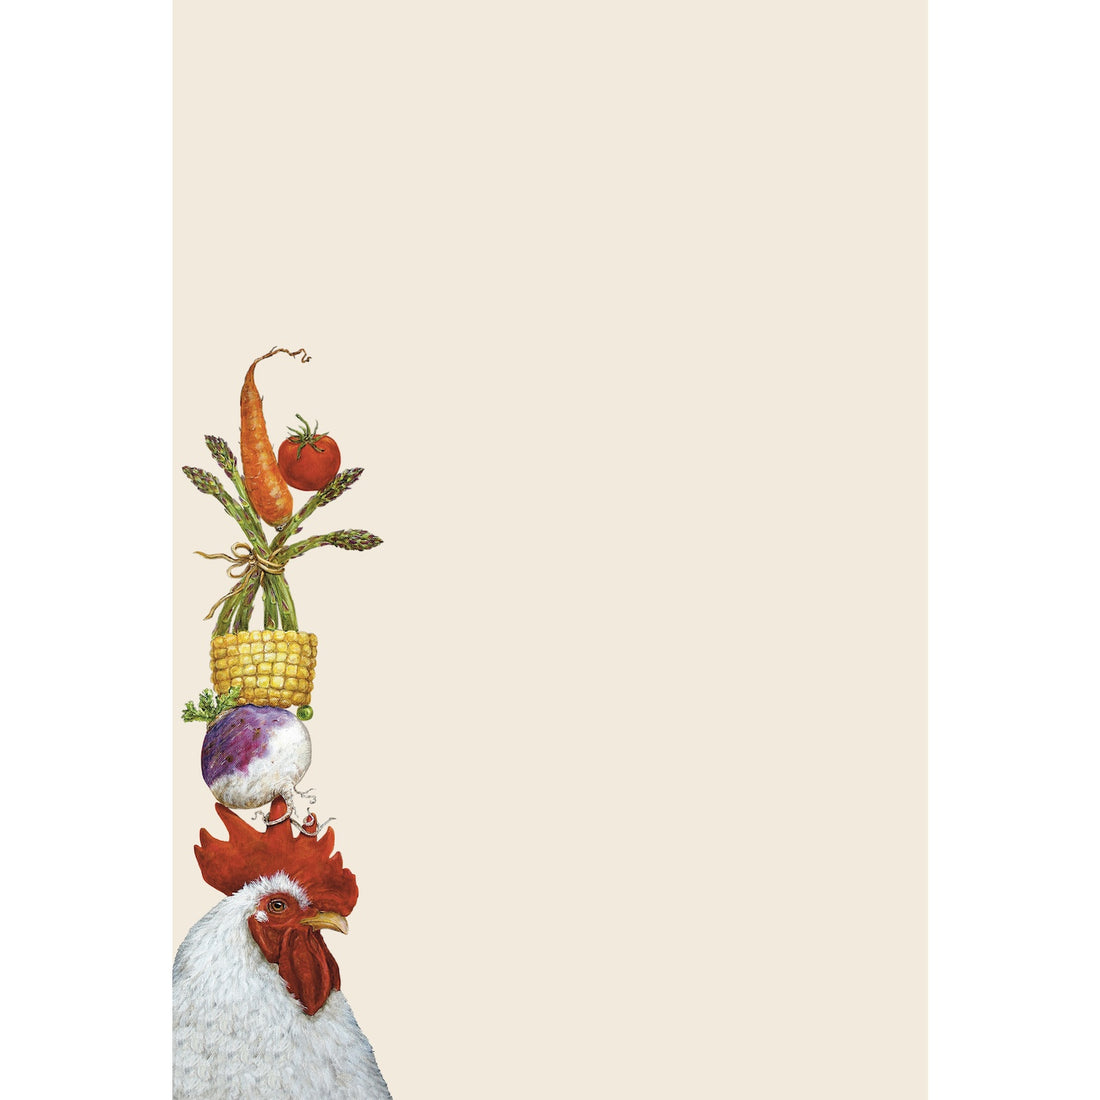 A whimsical Steady Rooster Note Pad illustration by Hester &amp; Cook with a stack of various foods balanced on its head.